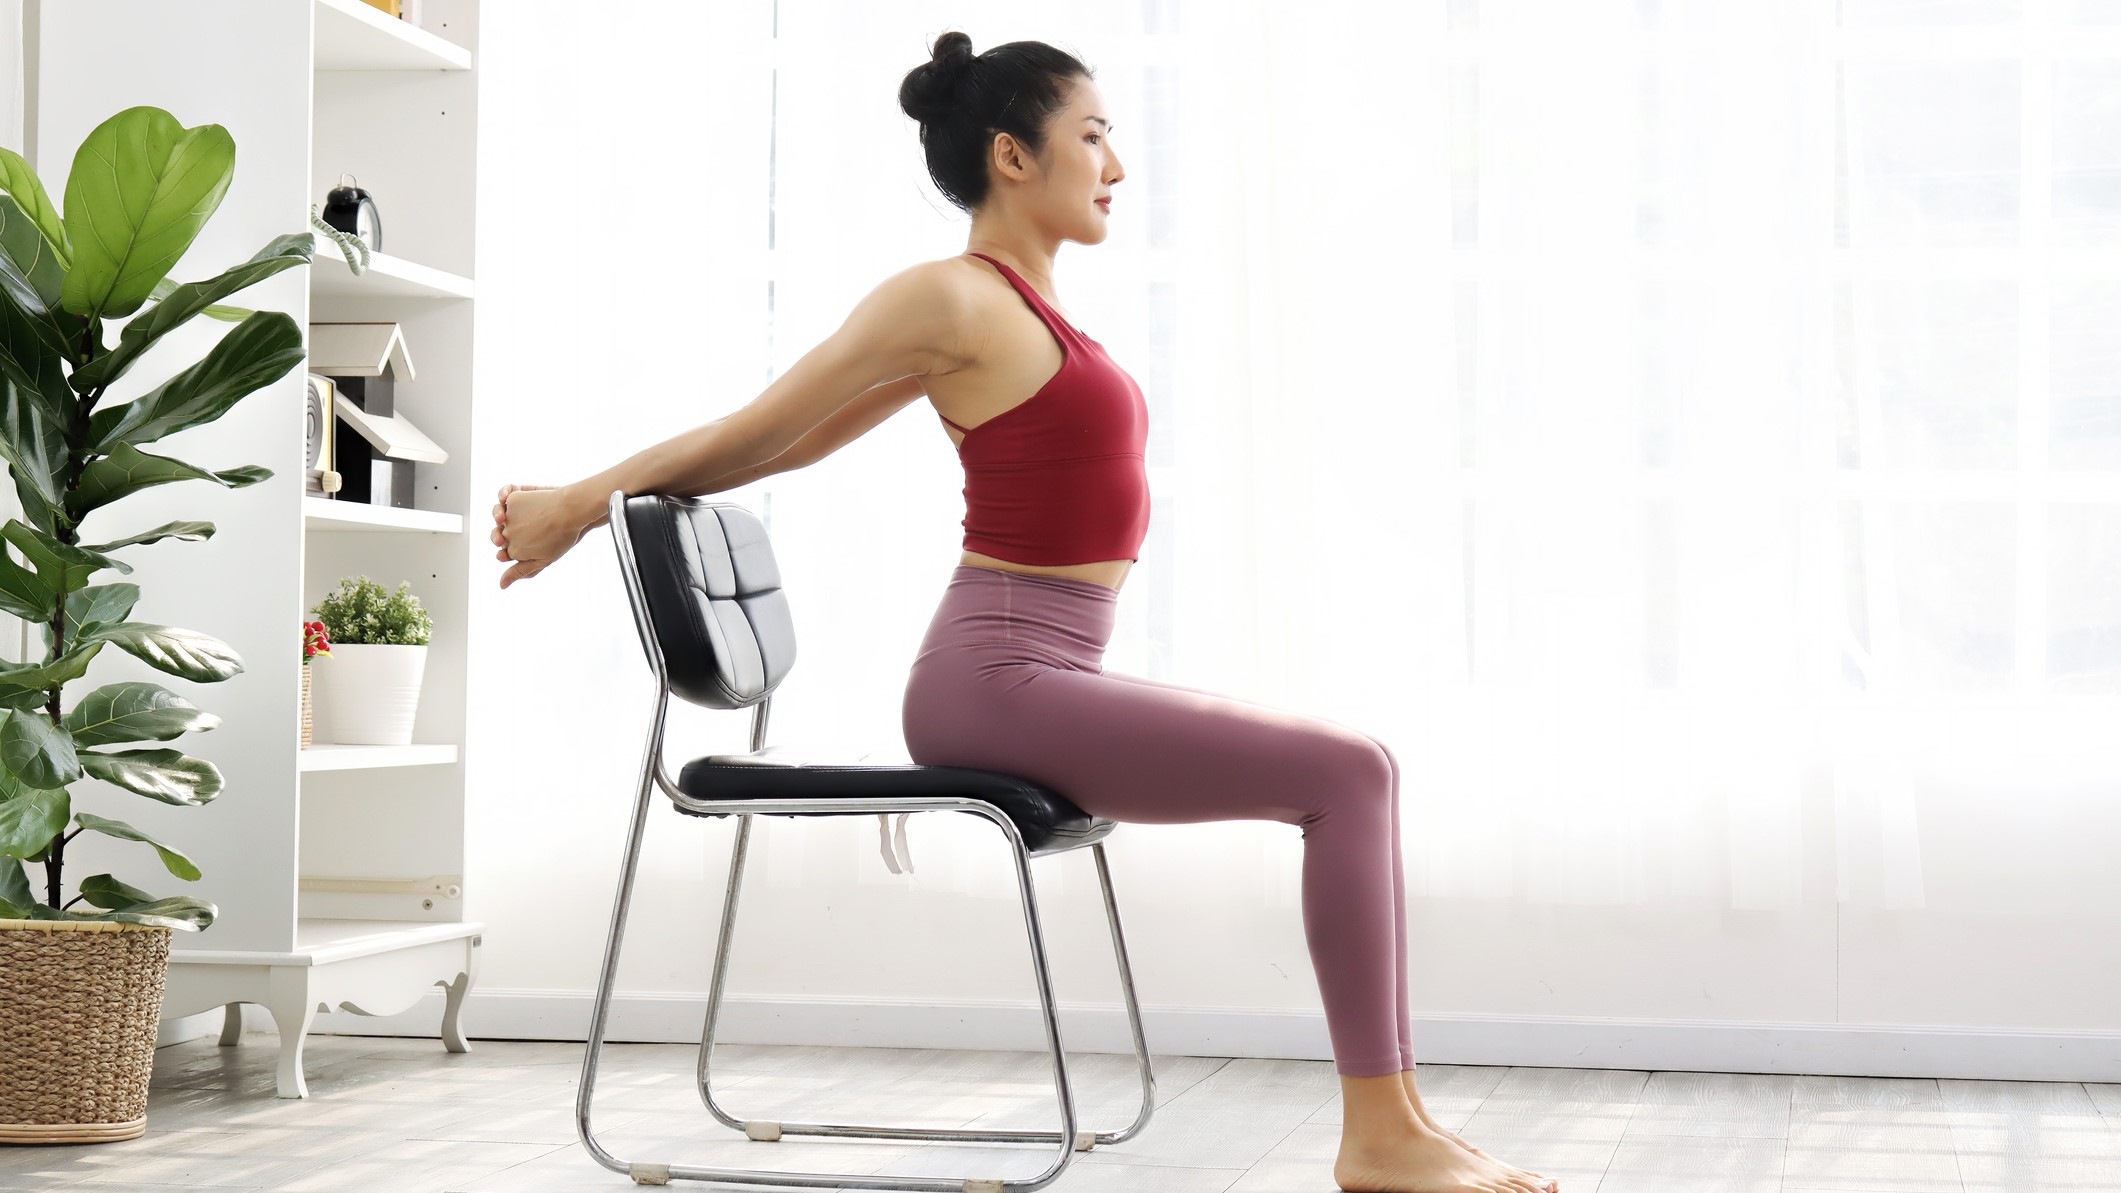 Forget planks — this seated ab workout sculpts your core in just 10 minutes